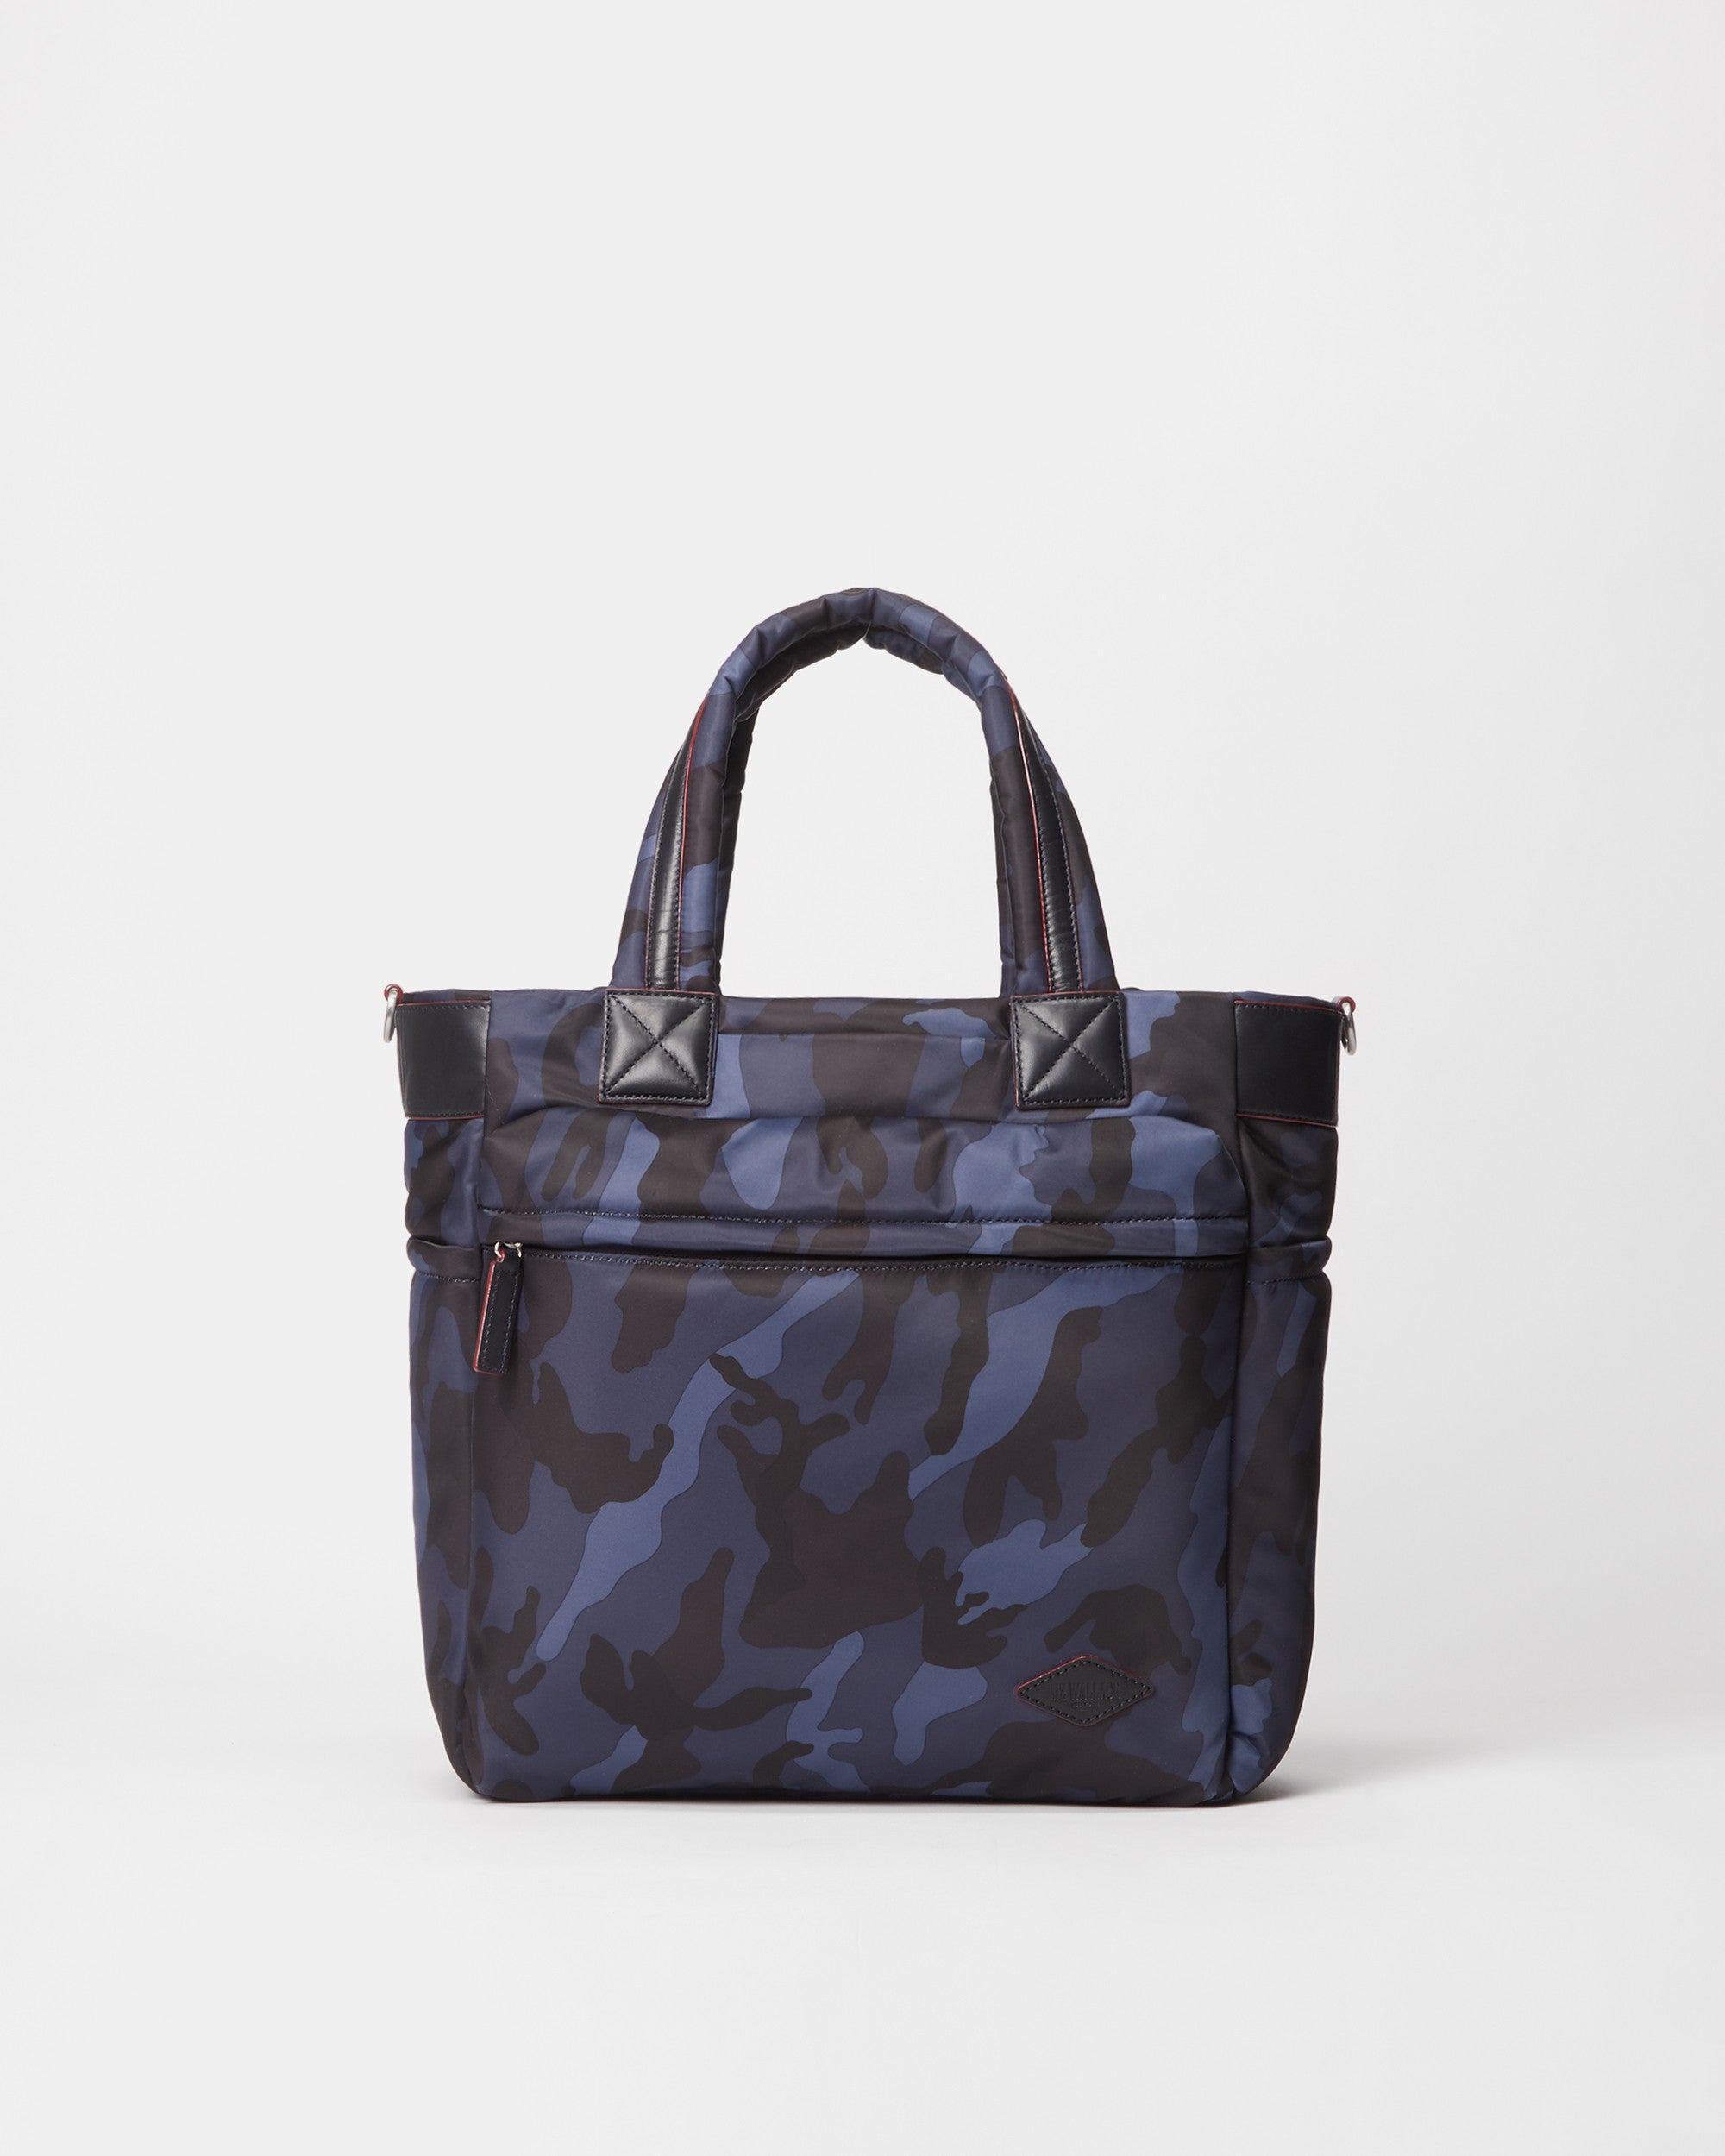 Why I love MZ Wallace tote: Lightweight. Water resistant. Easy to pack.  Great for travel.